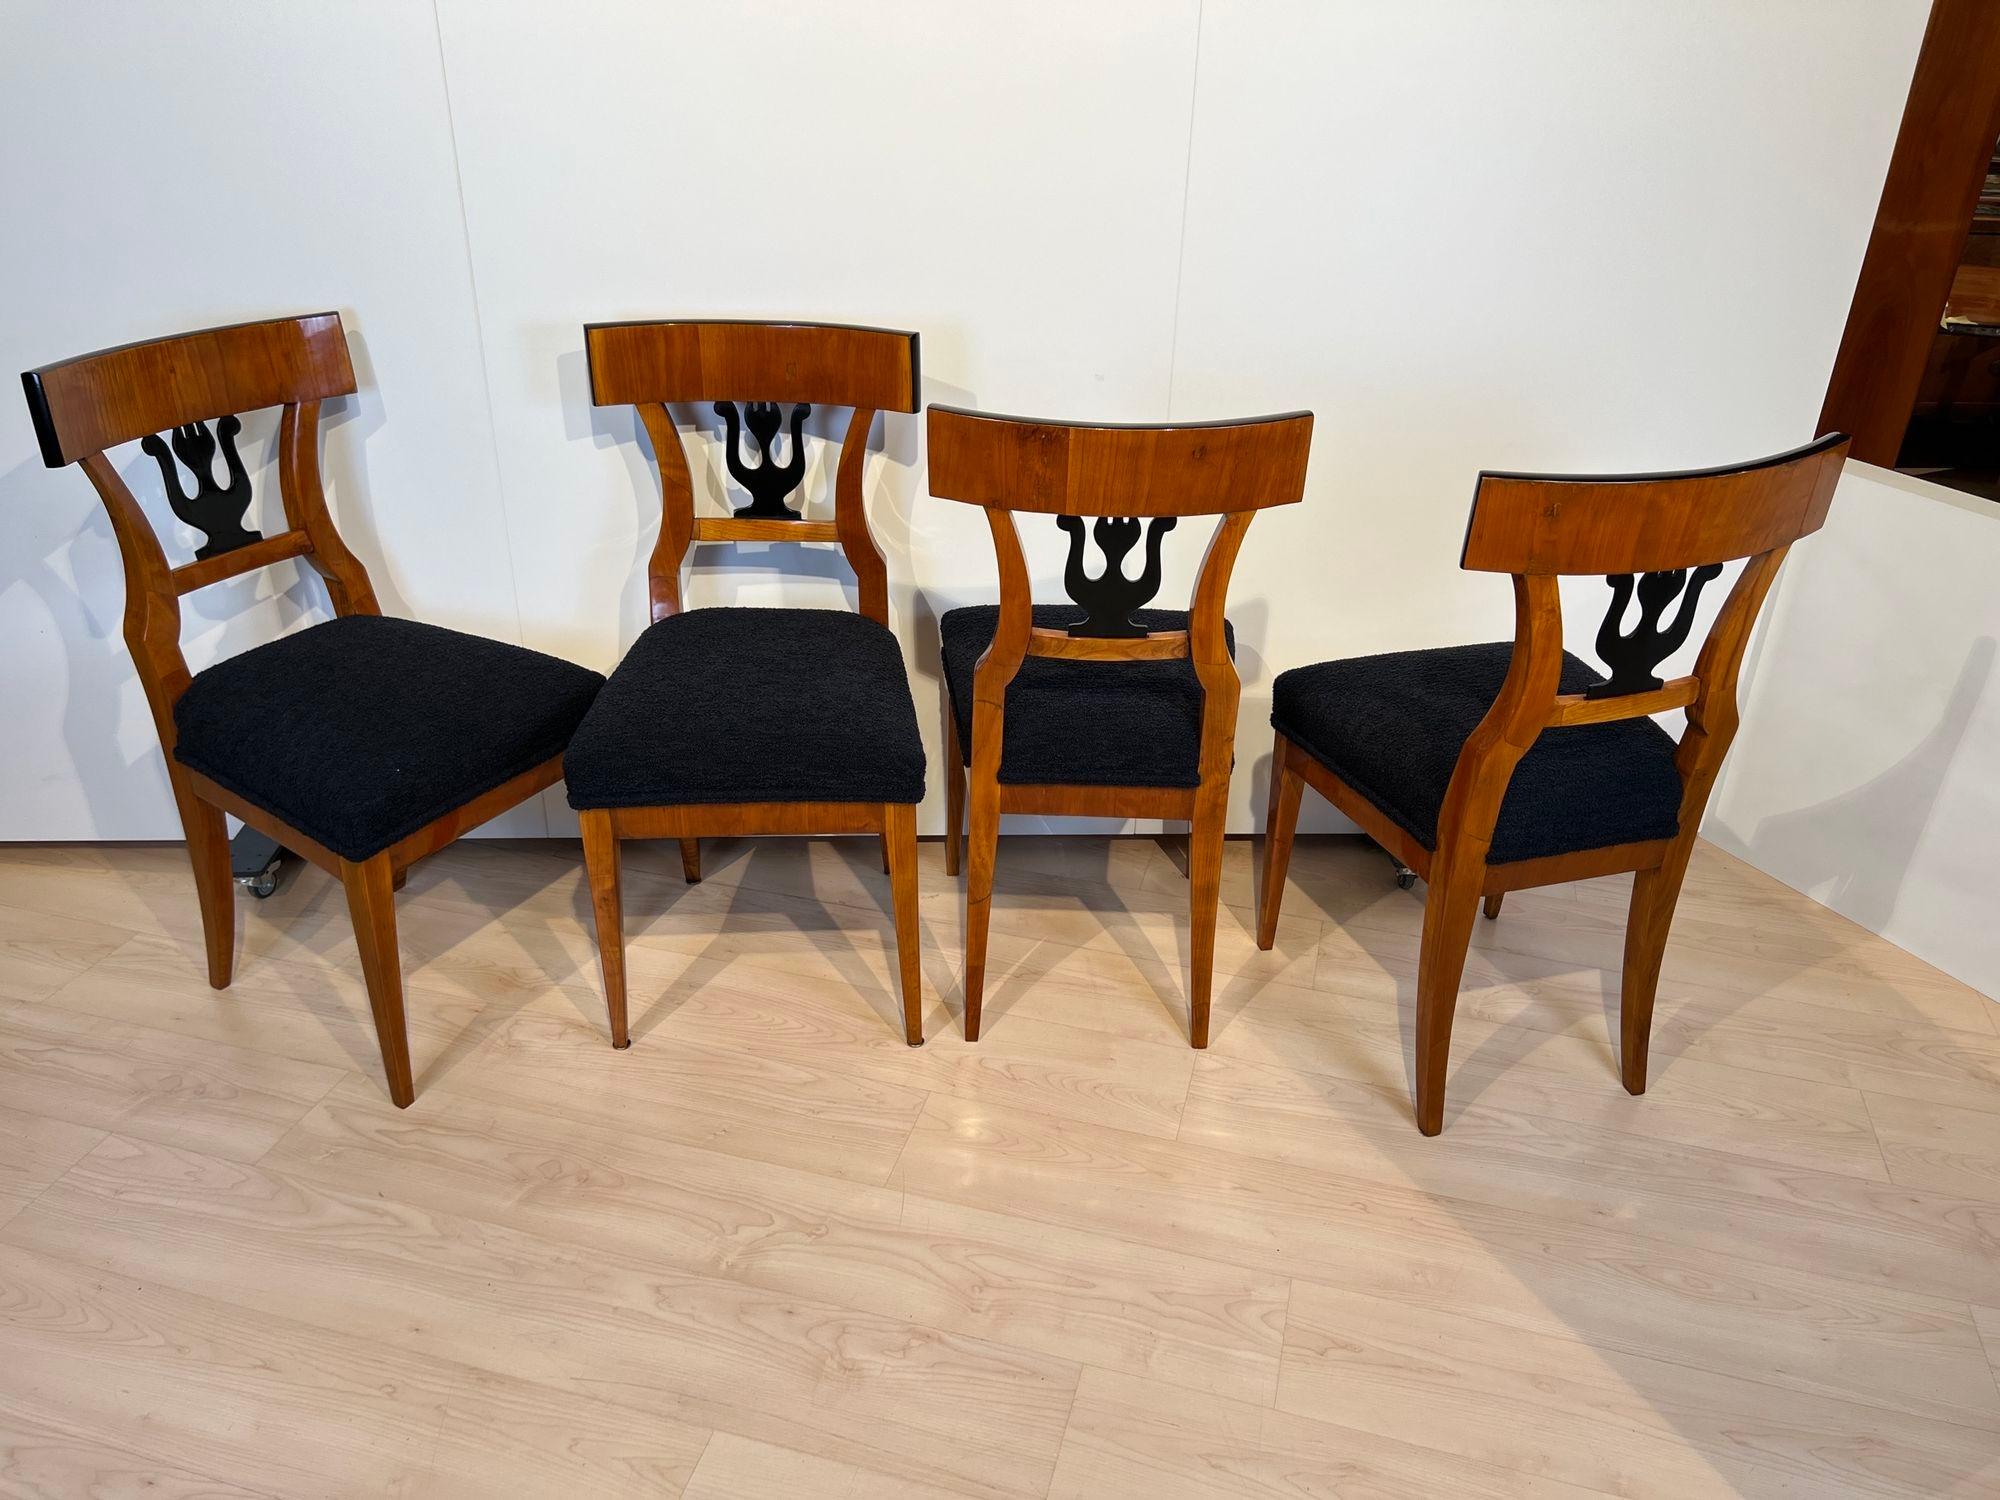 Very elegant set of 4 Biedermeier chairs from southern Germany around 1830.
Cherry wood veneered and solid. Ebonized back decoration in the shape of a lyre, a very classicist motif.
Newly upholstered and covered in black fluffy fabric. Restored and